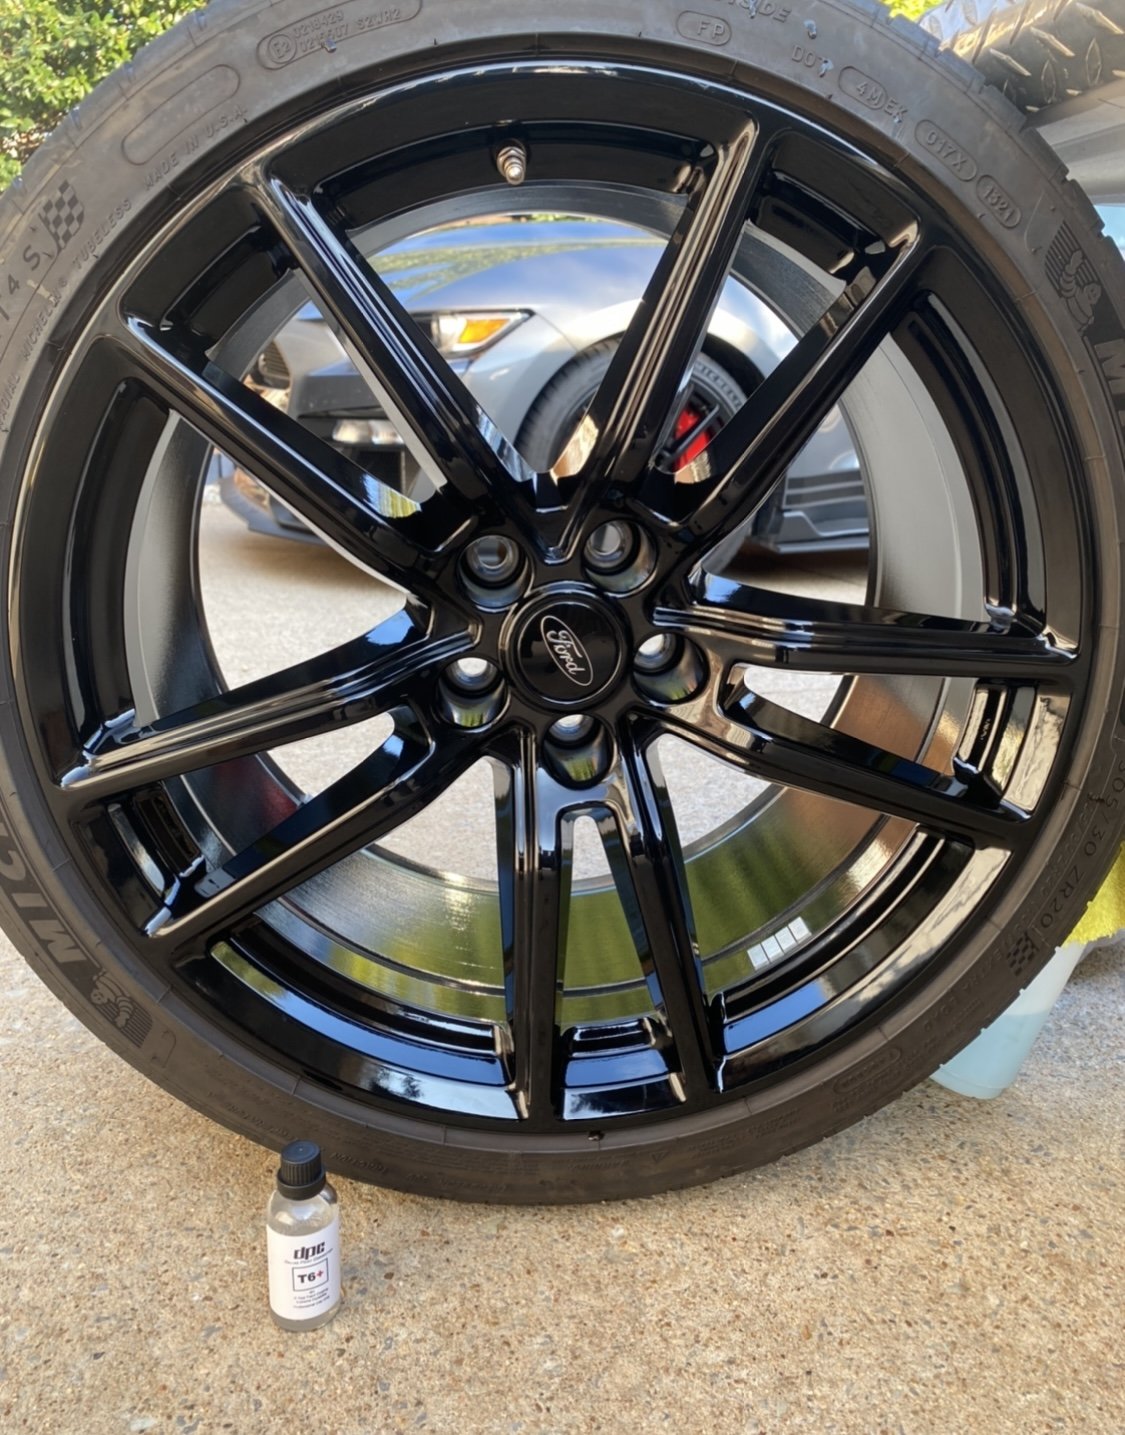 Wheel Cleaning and Ceramic Coating In Dallas - Detailing - Sweet's